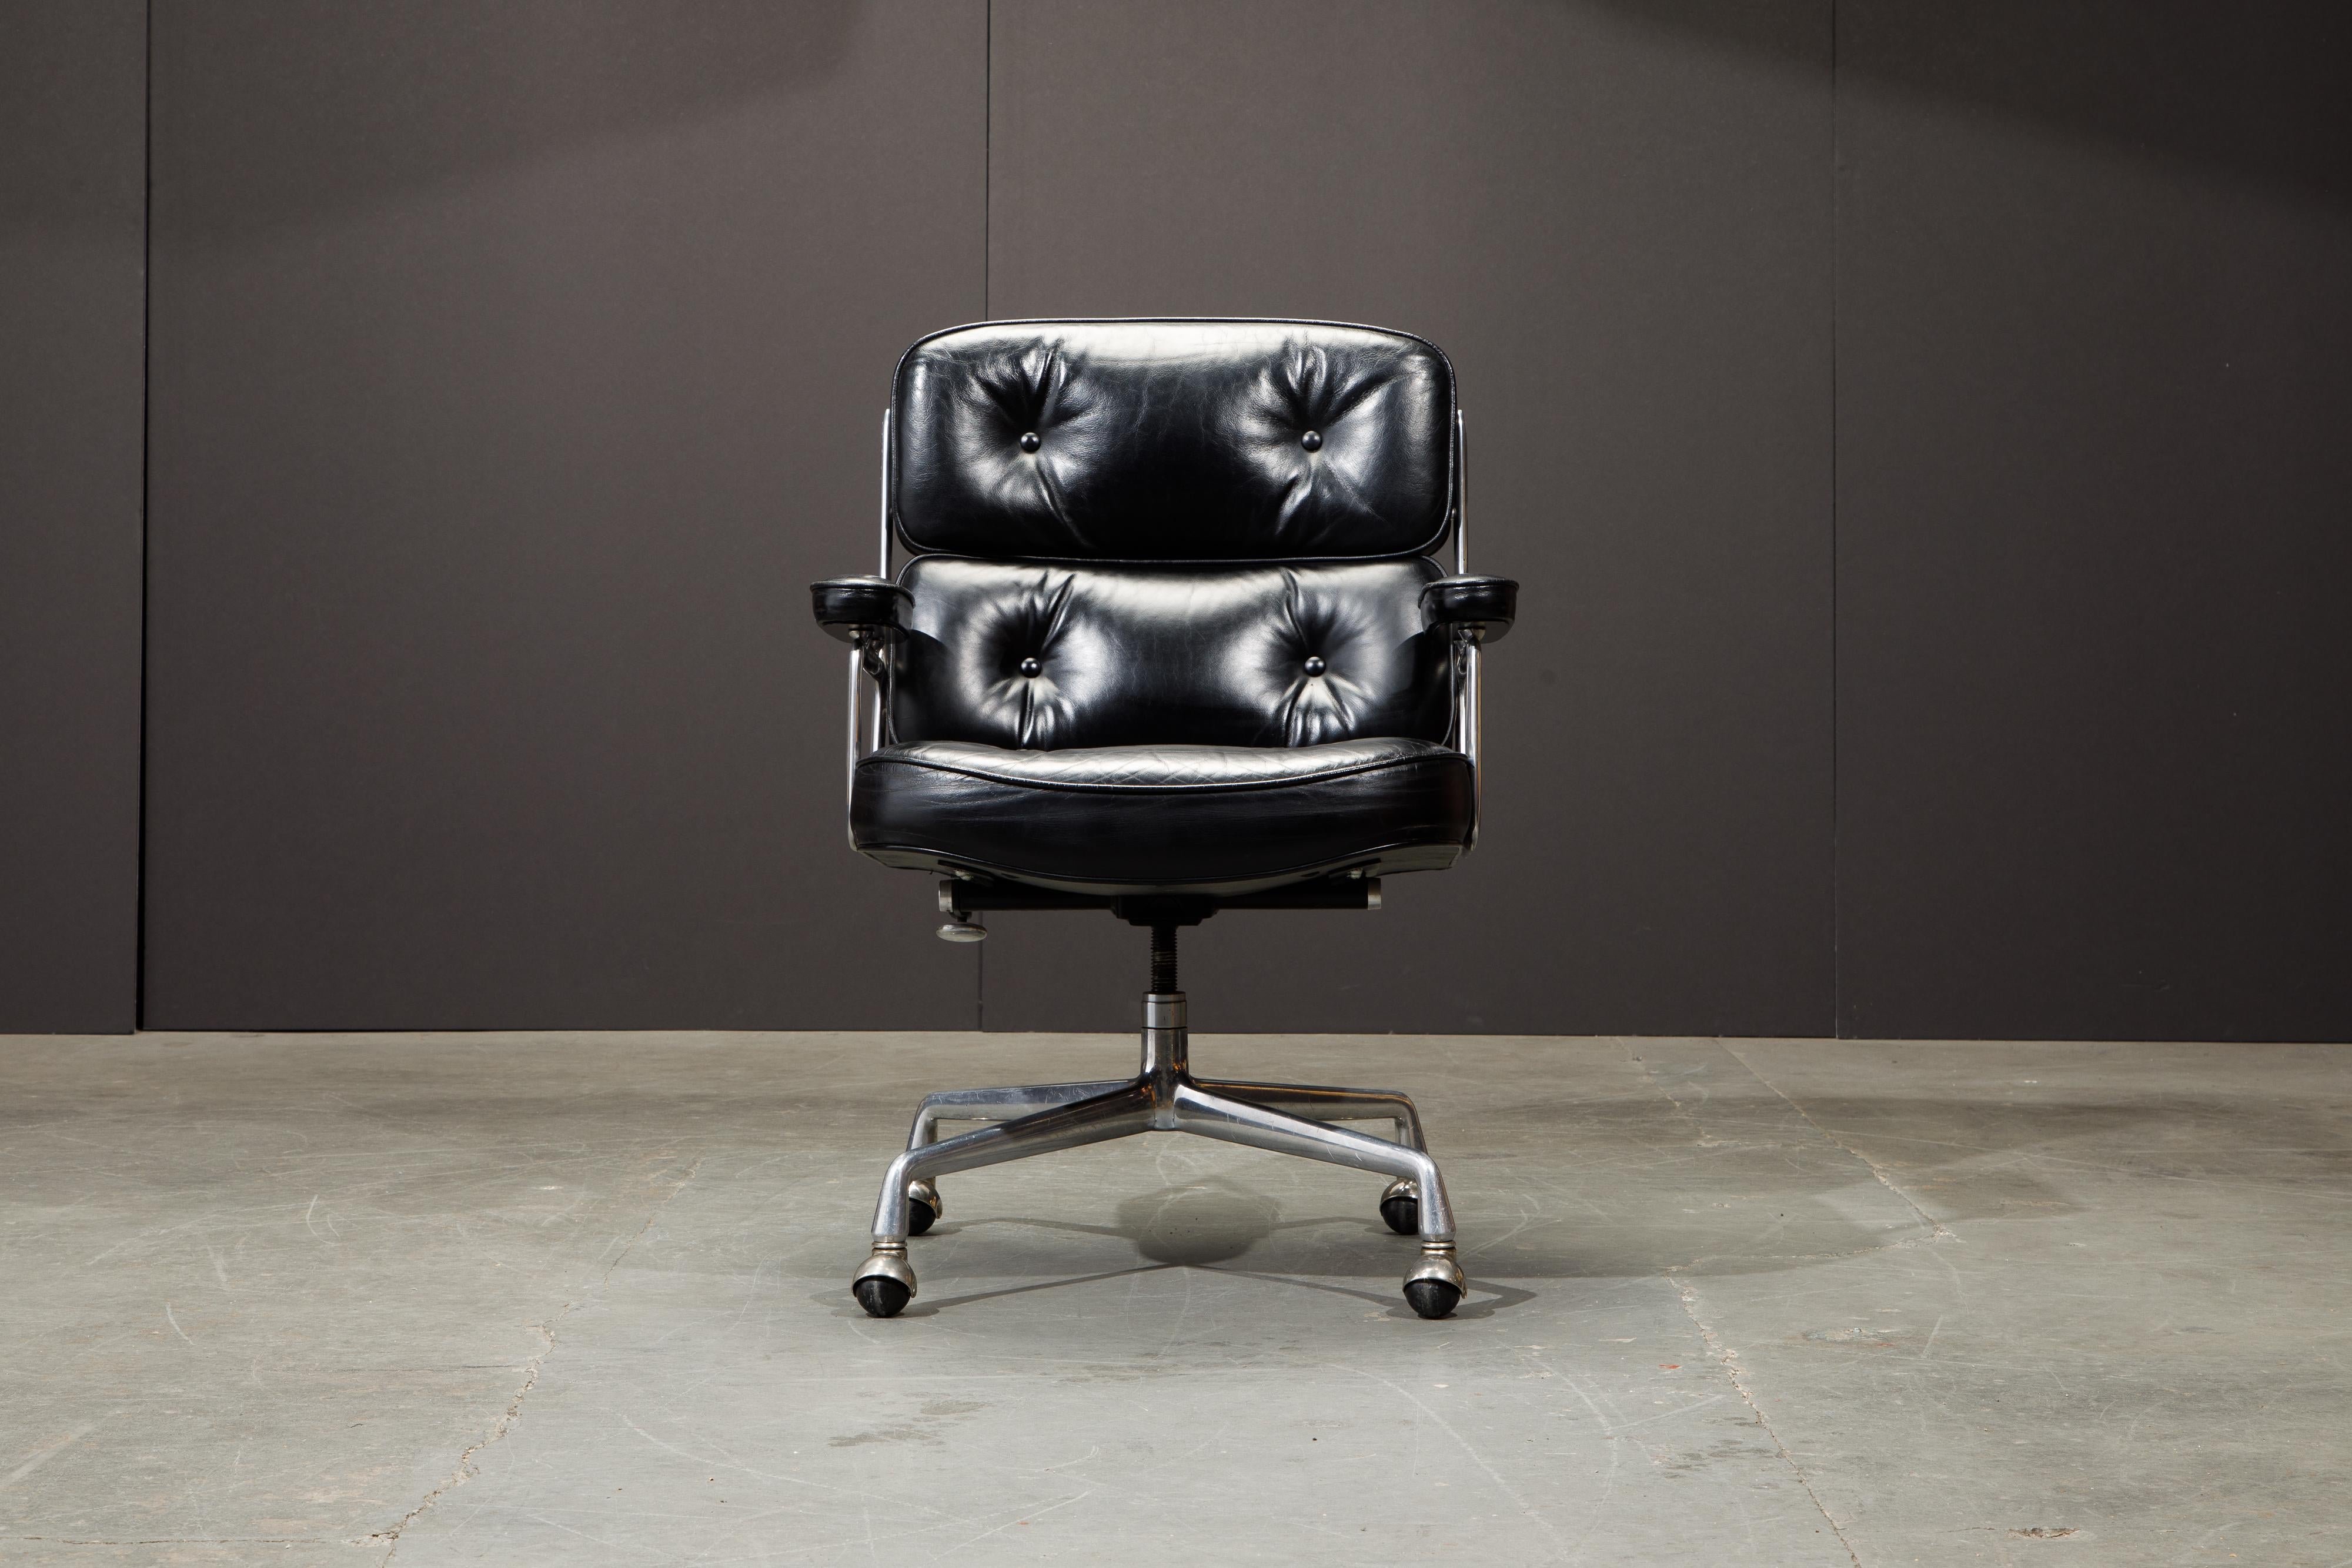 The ultimate desk chair and timeless classic by Charles and Ray Eames for Herman Miller. This early production collectors example of the Time Life 'Executive' chair was originally designed for the Time Life building hence the chair's name. This Time